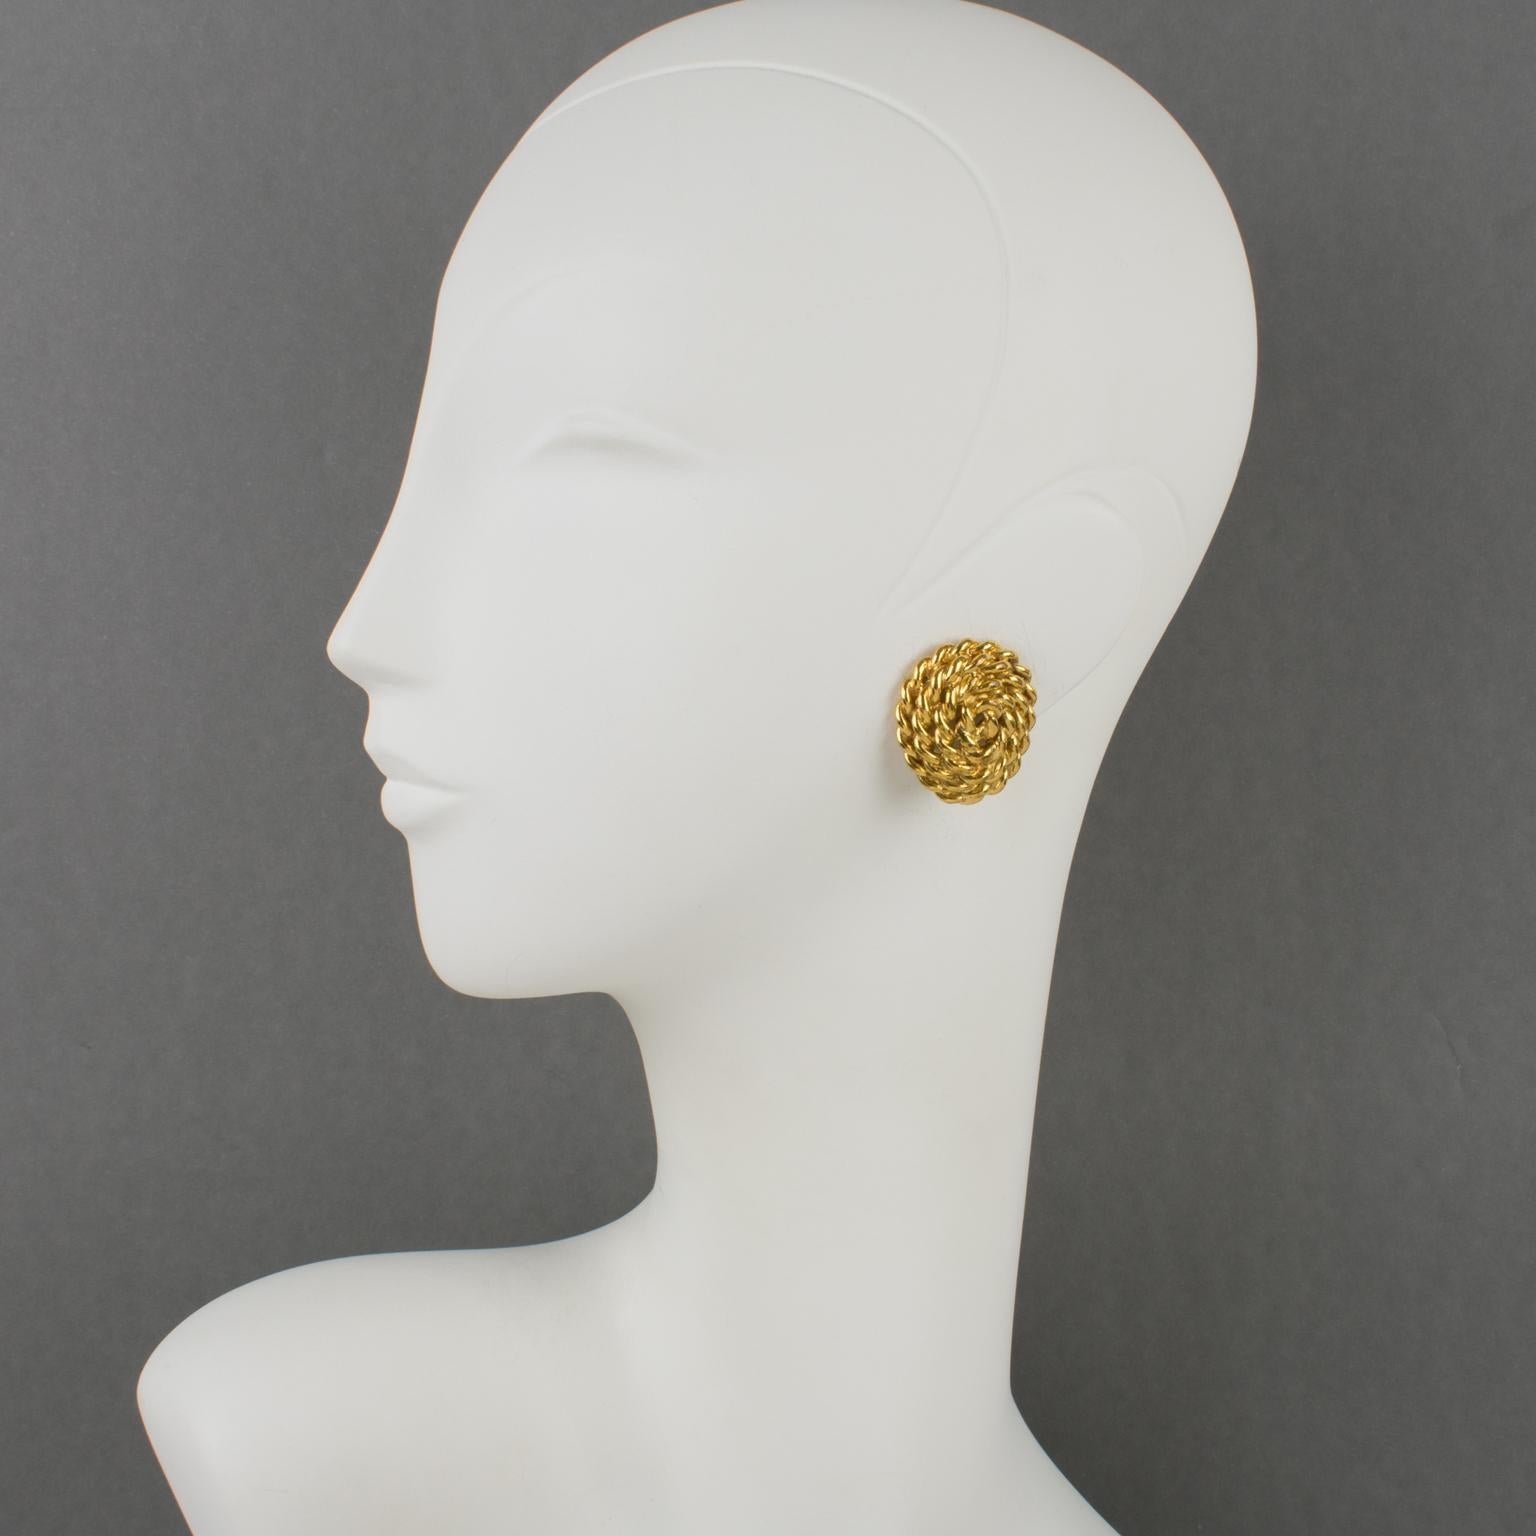 Yves Saint Laurent Paris designed those elegant stud clip-on earrings. The dimensional ovoid shape has gilt metal, all textured and carved in a rope design. The pieces are signed at the back with YSL pierced logo on the fastenings and, also engraved